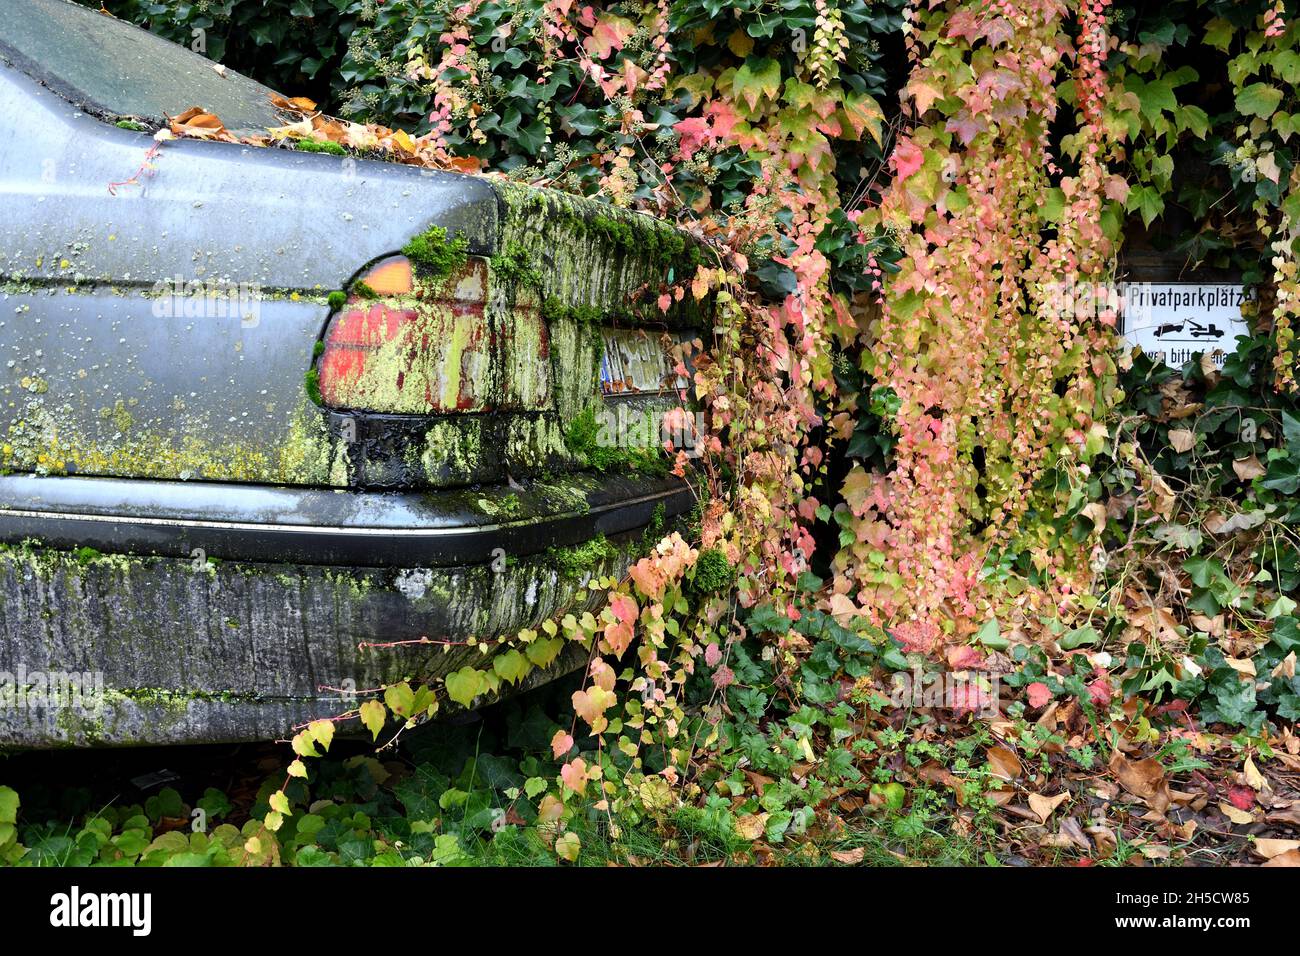 overgrown car, 'leave the car standing still from time to time' Stock Photo